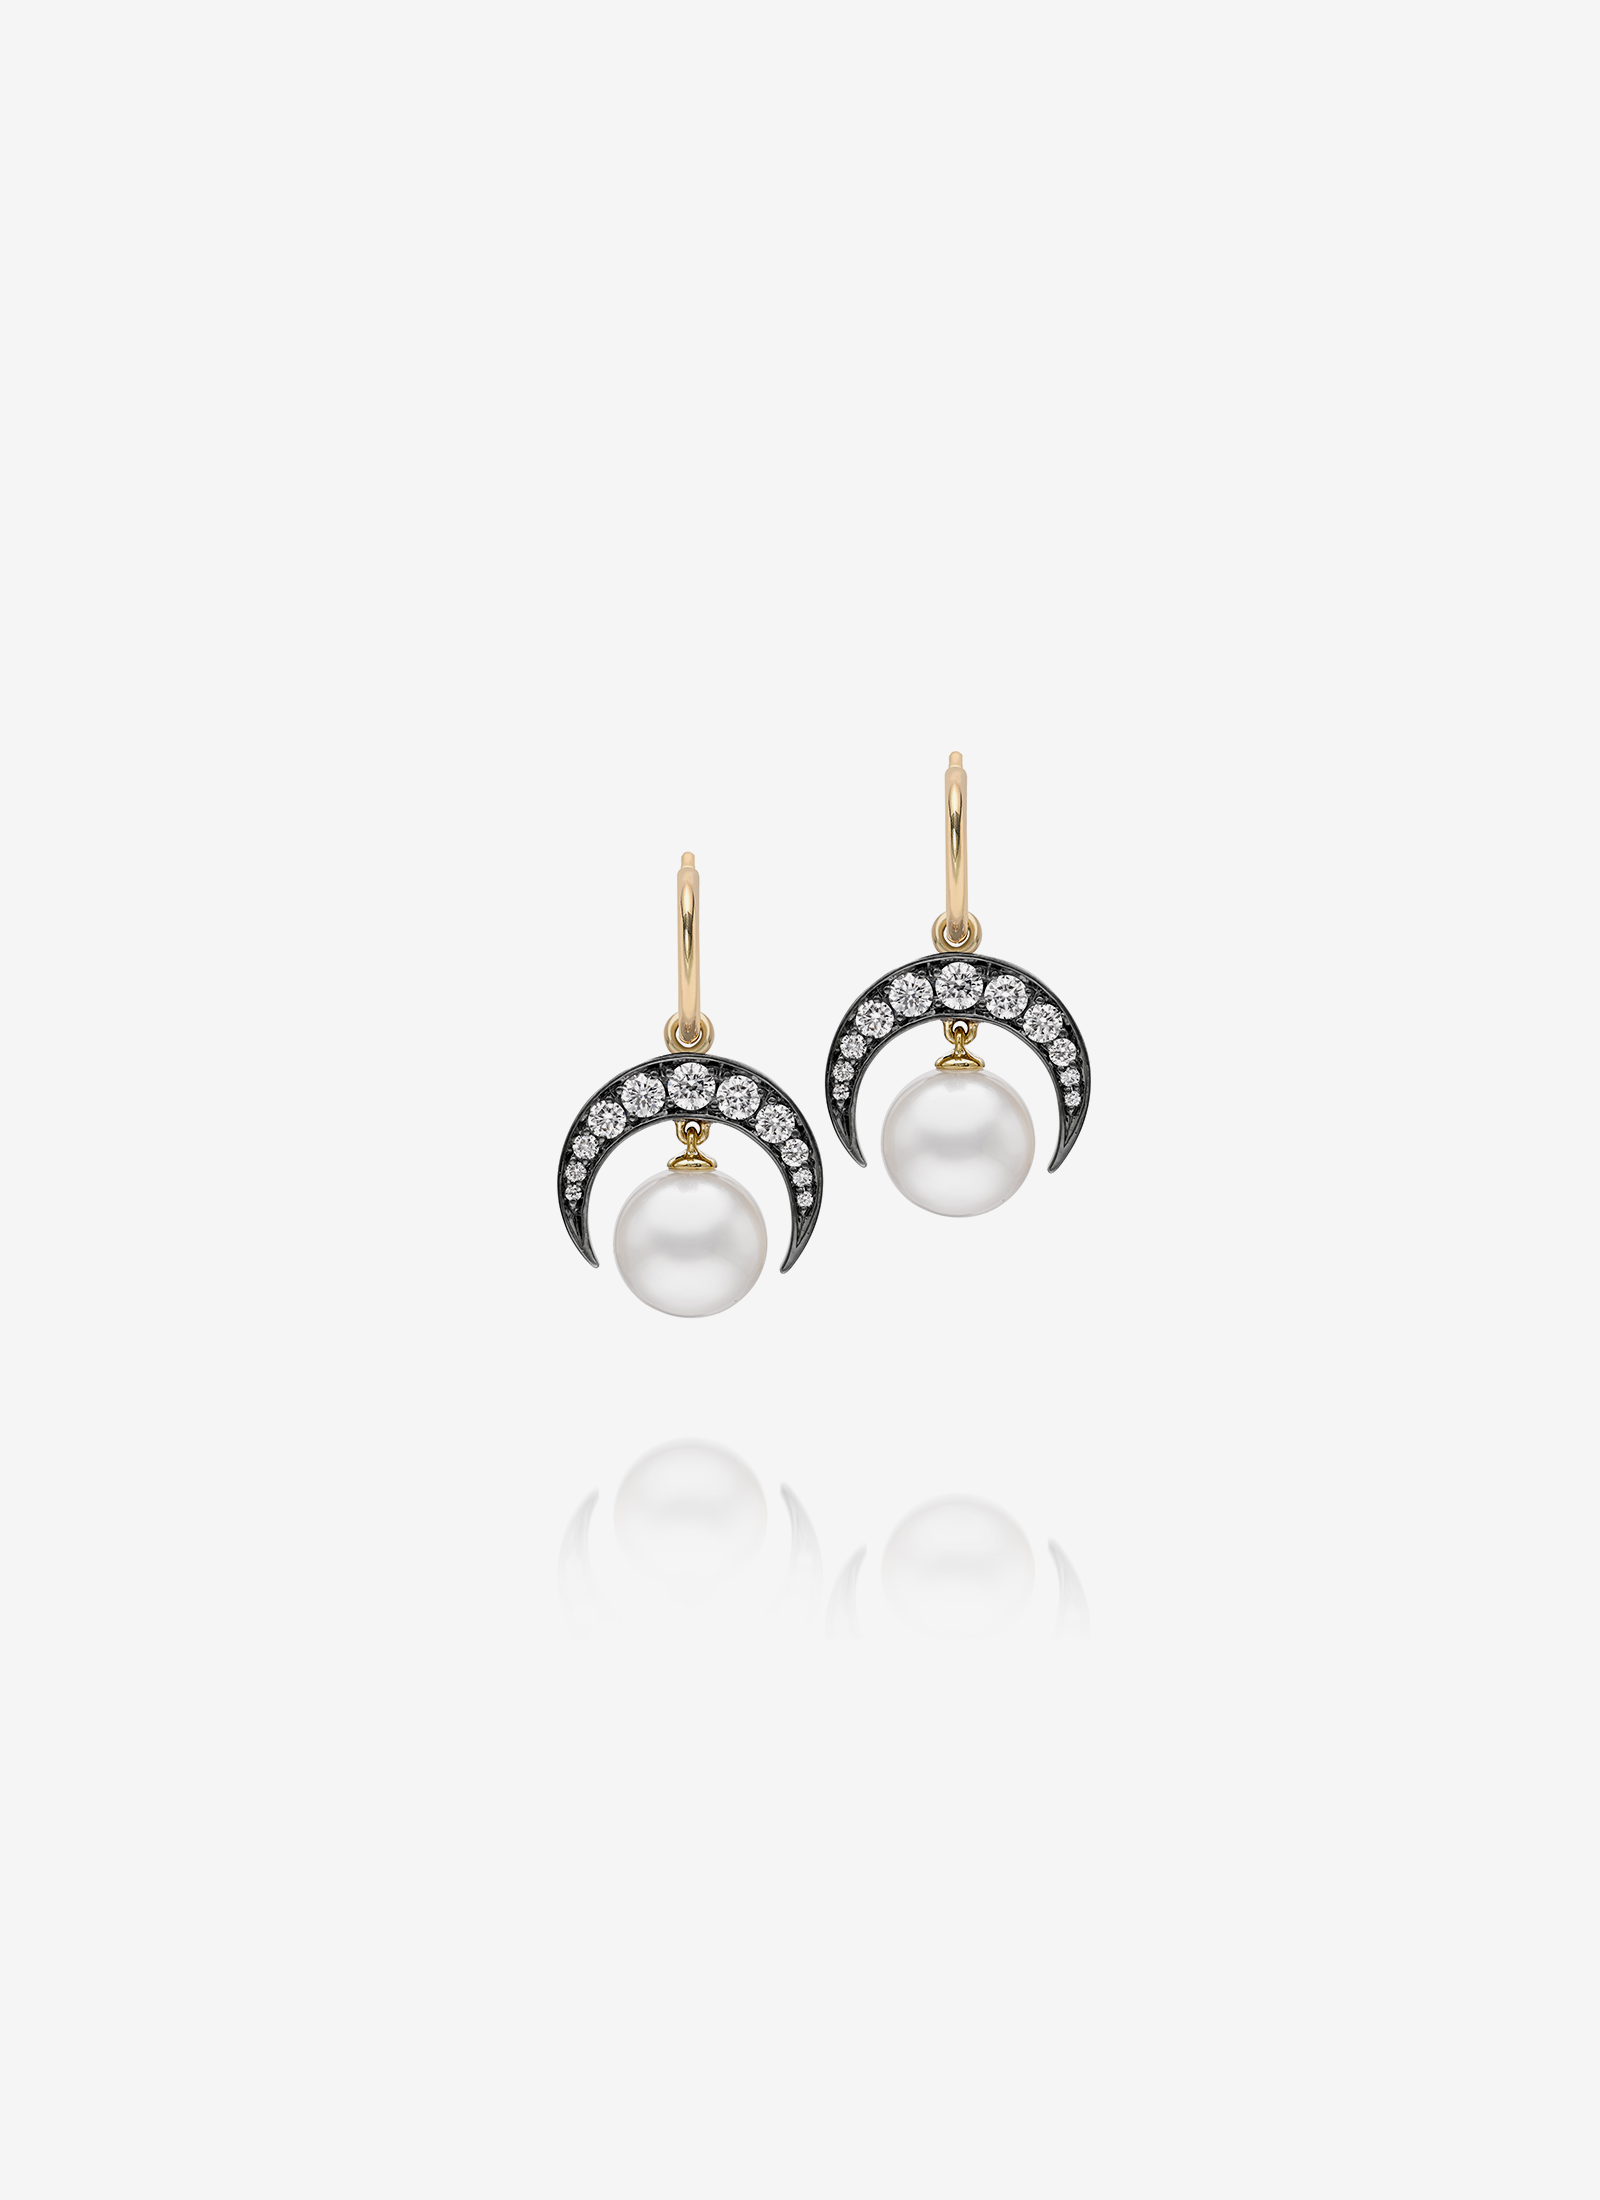 Crescent Moon Diamond and Pearl Earrings